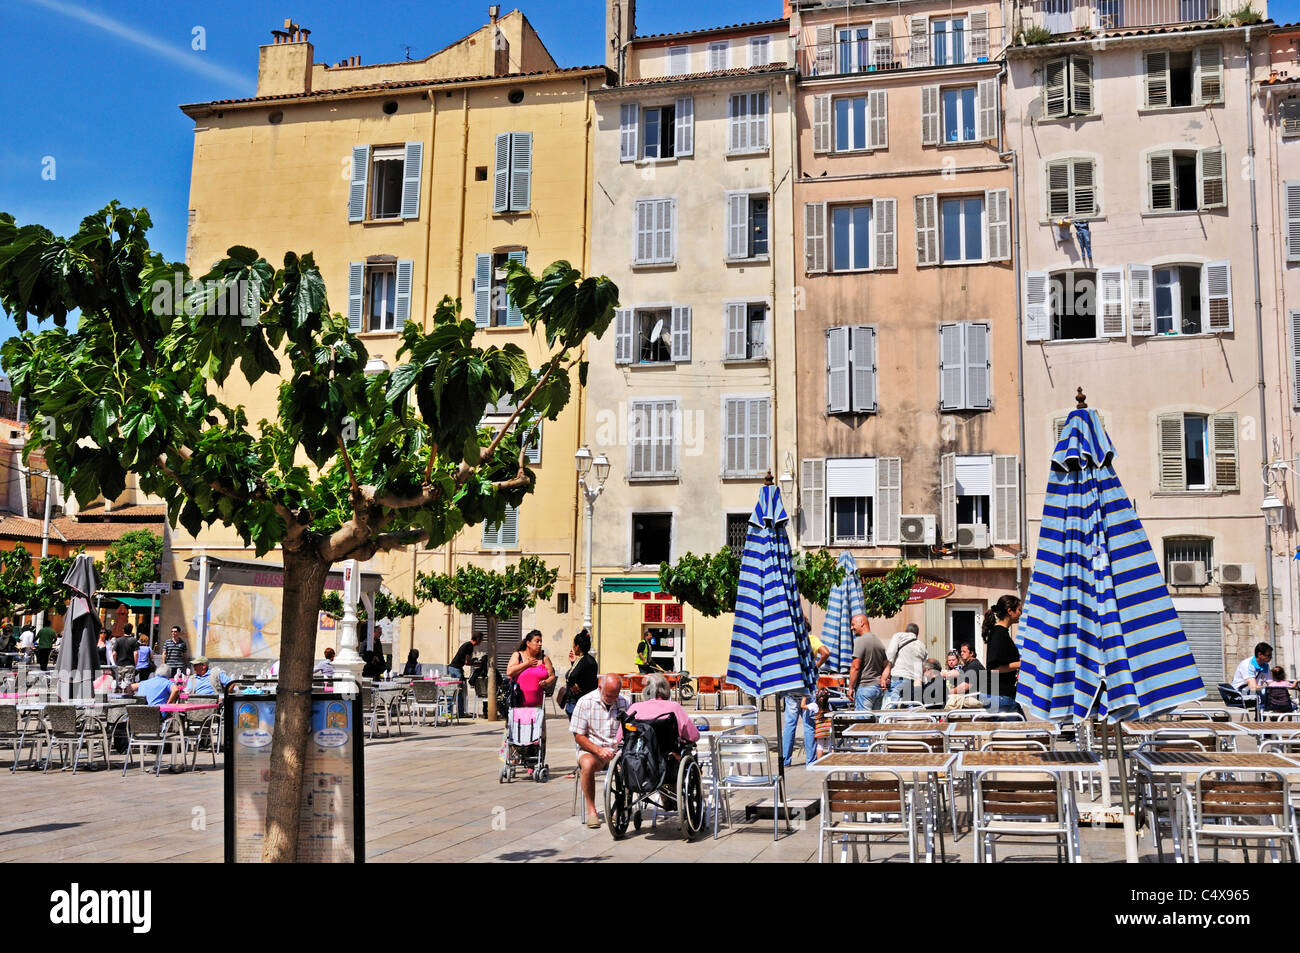 The tables and chairs of a charming outdoor brasseries waiting to be filled with customers in Place Louis Blanc, Toulon, France Stock Photo